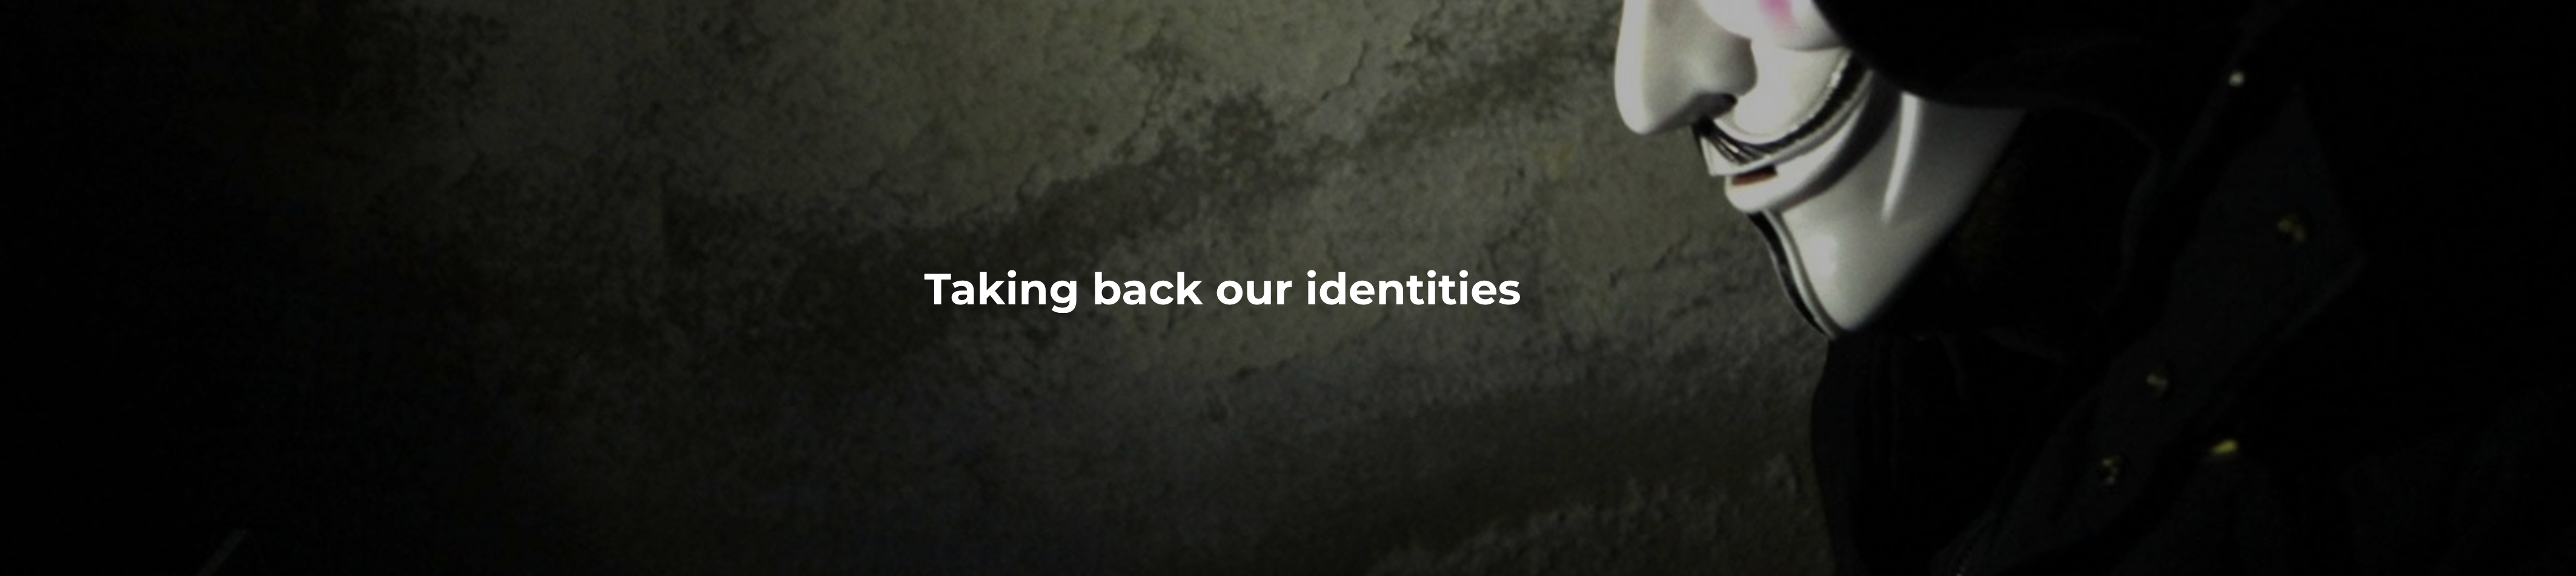 Taking back our identities